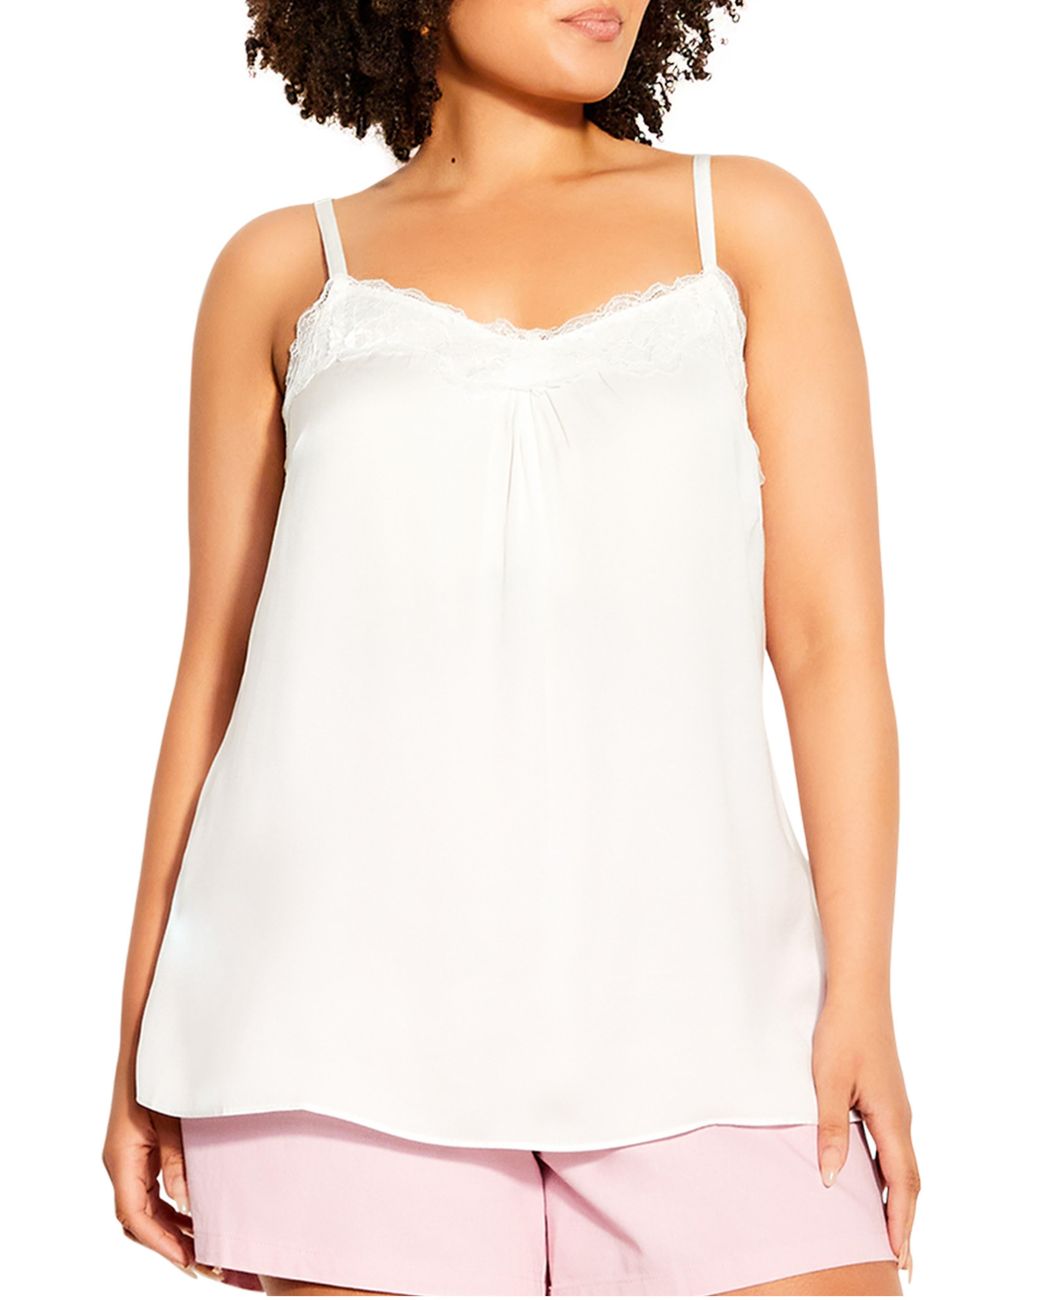 City Chic Budding Romance Camisole in White | Lyst